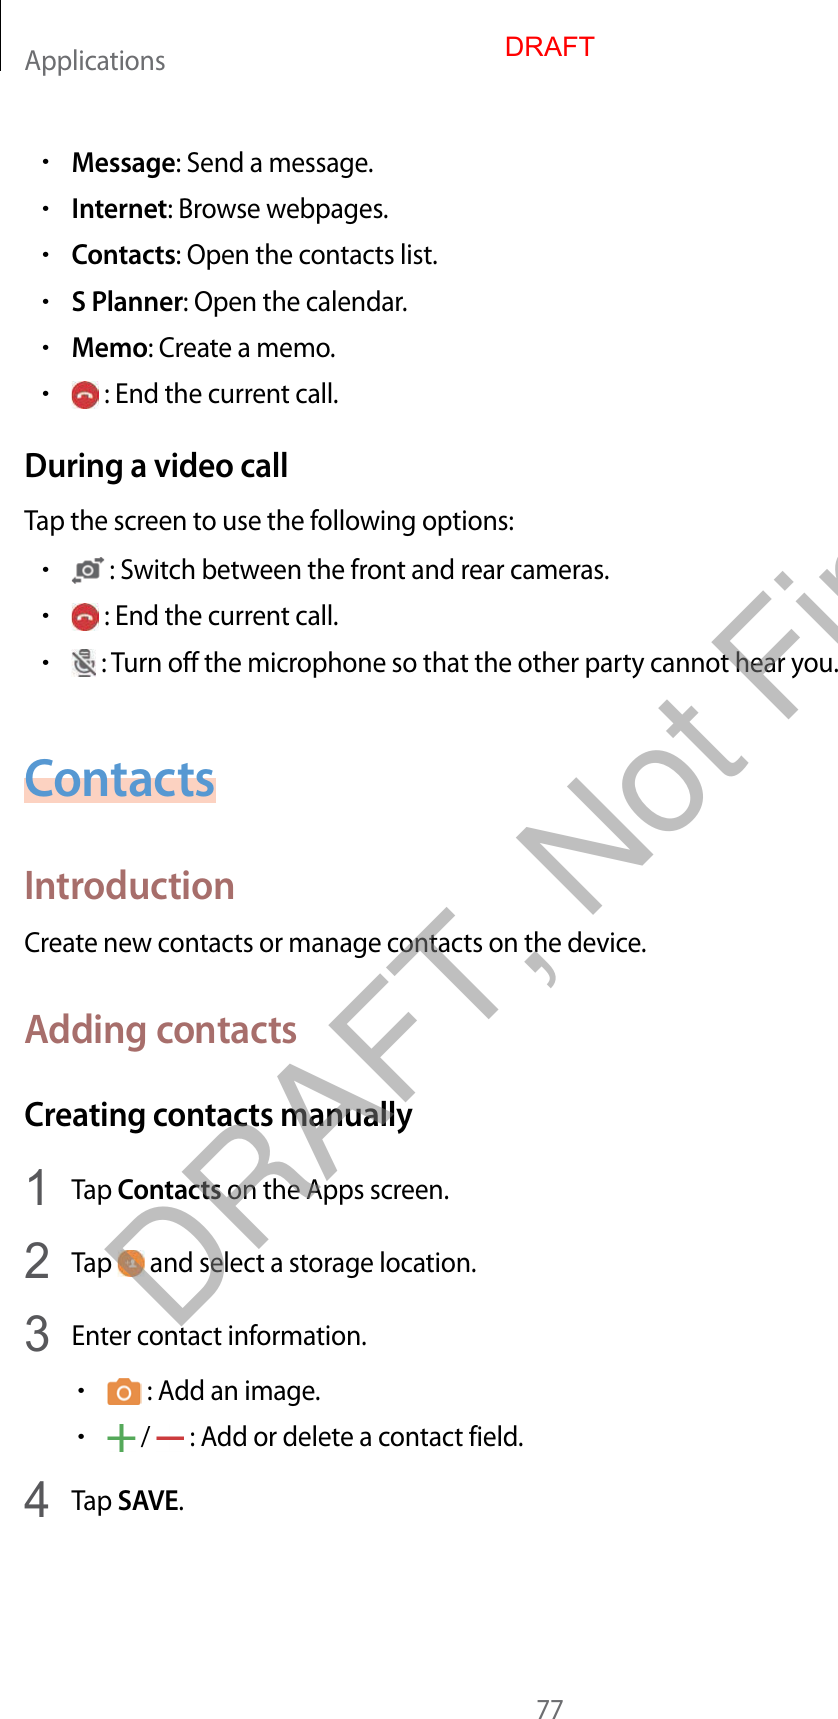 Applications77•Message: Send a message.•Internet: Browse webpages.•Contacts: Open the contacts list.•S Planner: Open the calendar.•Memo: Create a memo.• : End the current call.During a video callTap the screen to use the following options:• : Switch between the front and rear cameras.• : End the current call.• : Turn off the microphone so that the other party cannot hear you.ContactsIntroductionCreate new contacts or manage contacts on the device.Adding contactsCreating contacts manually1  Tap Contacts on the Apps screen.2  Tap   and select a storage location.3  Enter contact information.• : Add an image.• /   : Add or delete a contact field.4  Tap SAVE.DRAFTDRAFT, Not Final